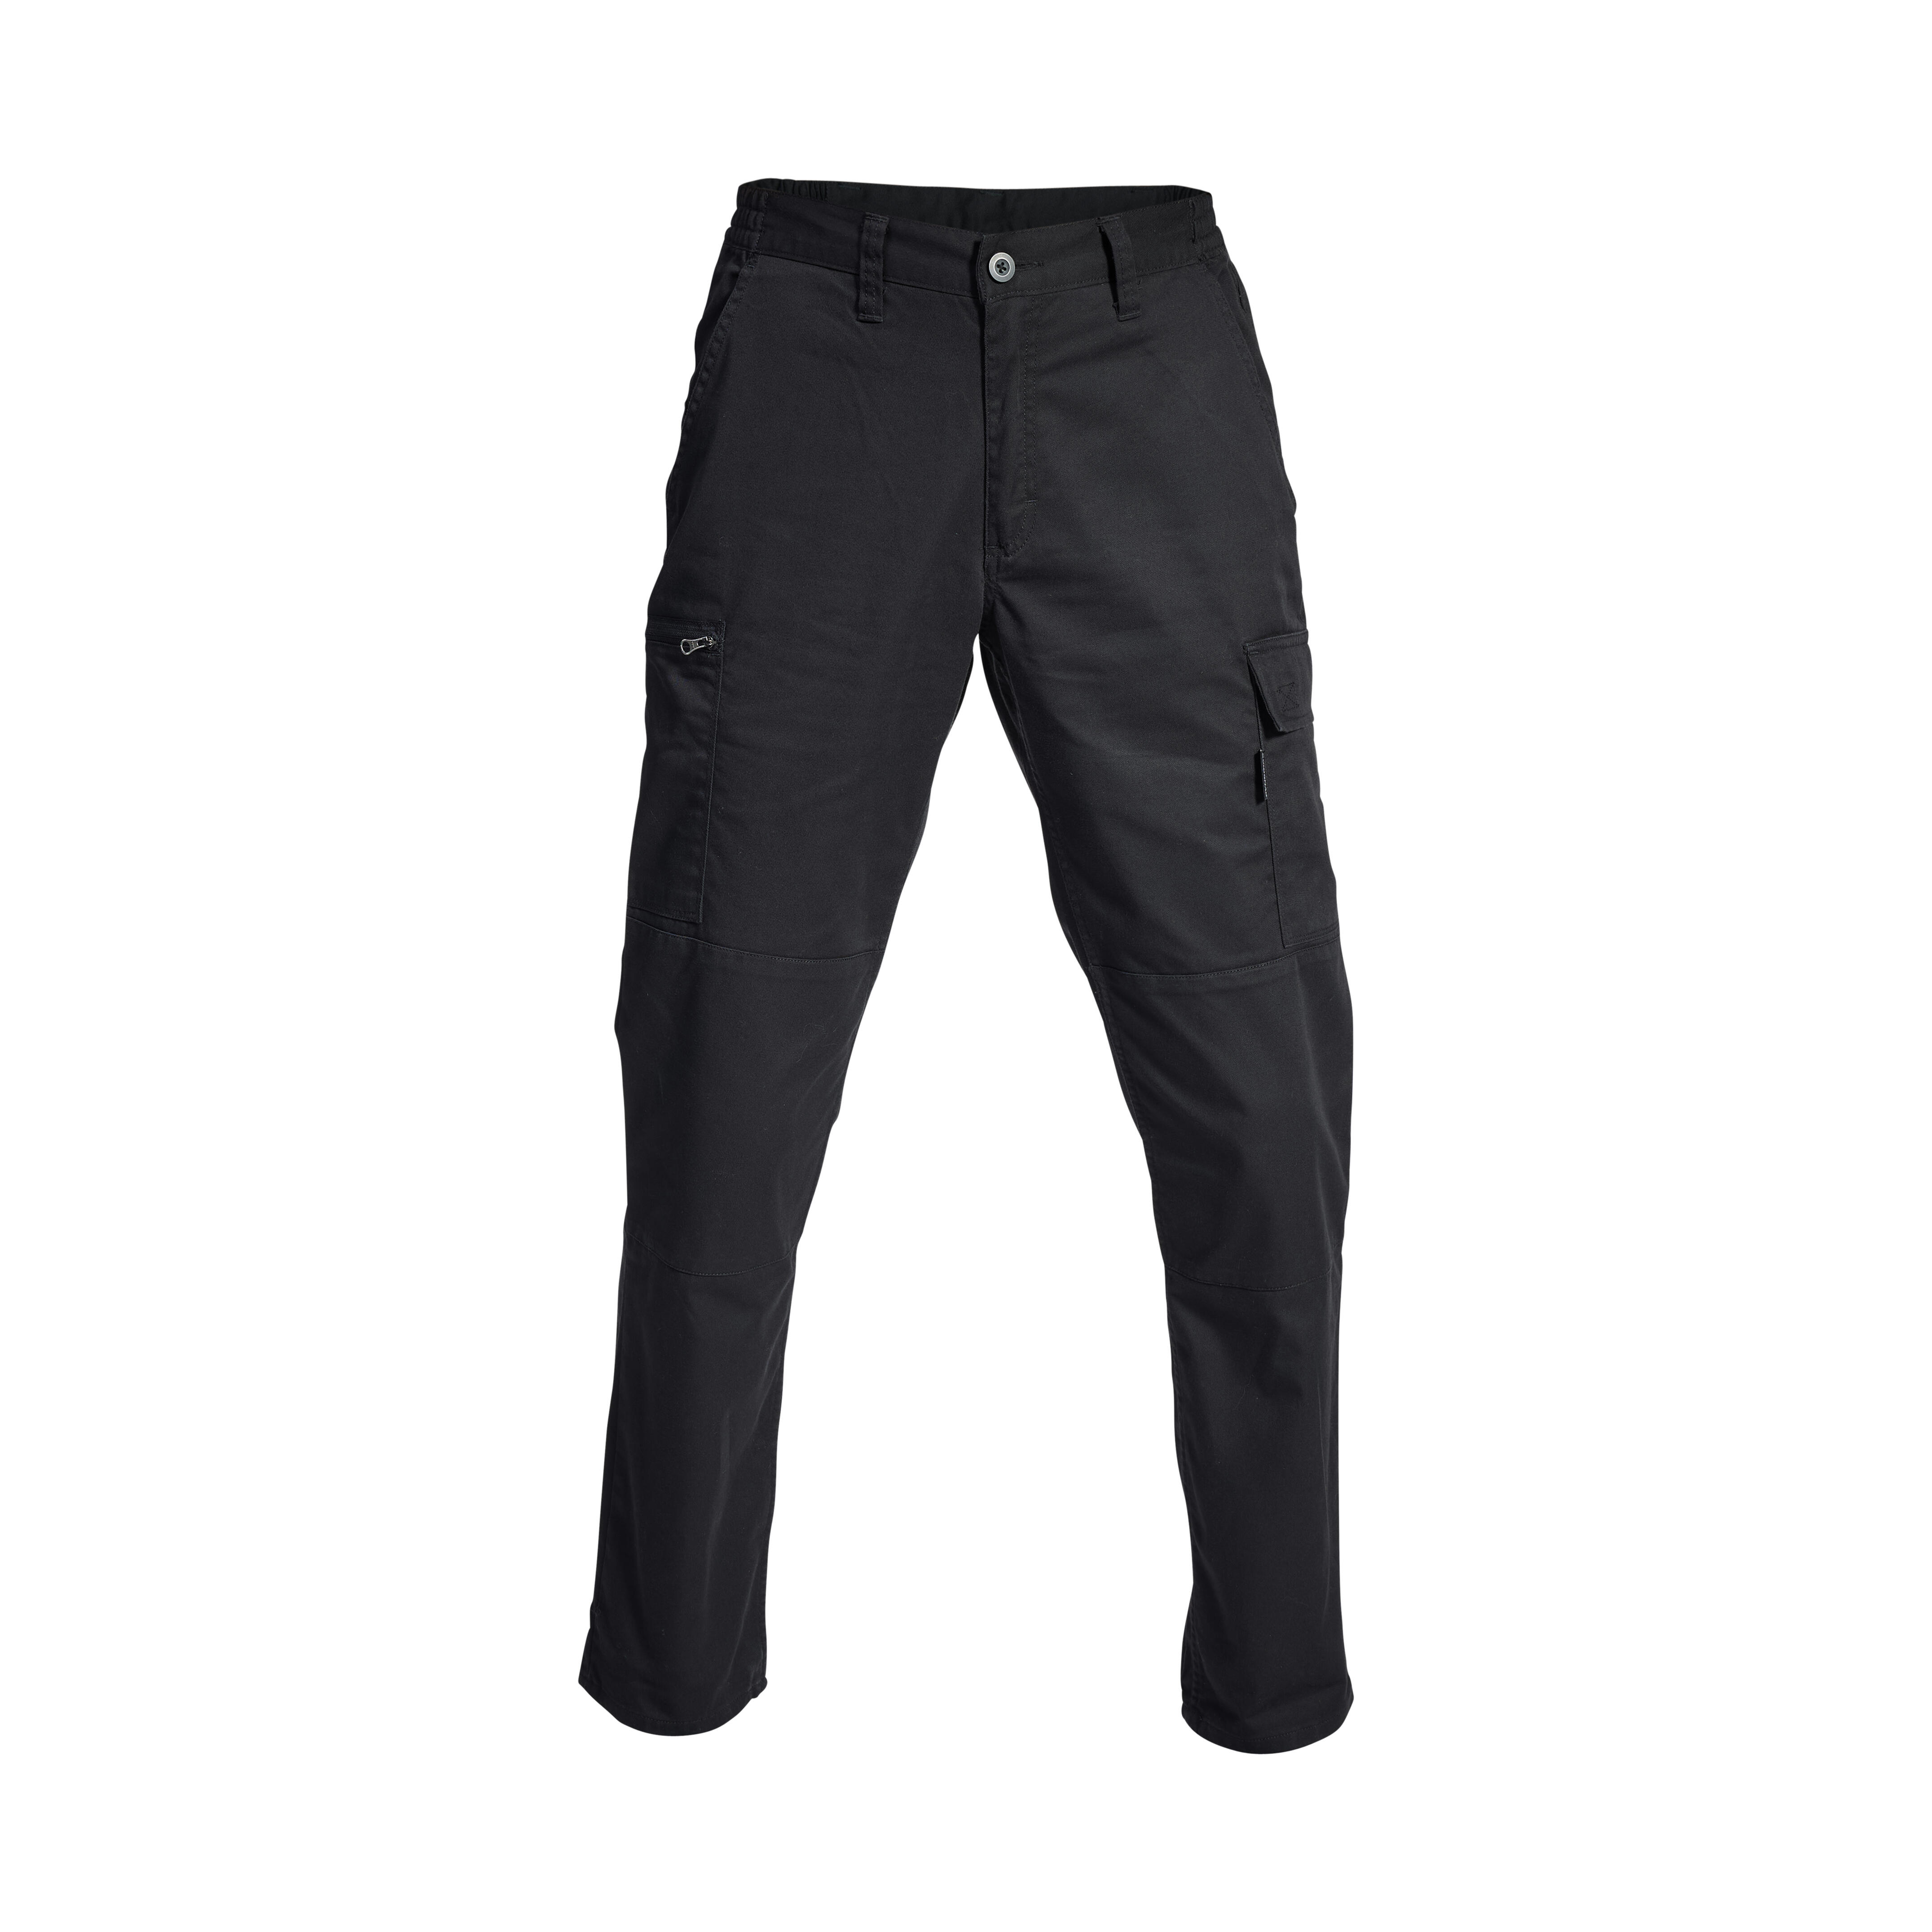 Aggregate 93+ mens casual combat trousers latest - in.cdgdbentre